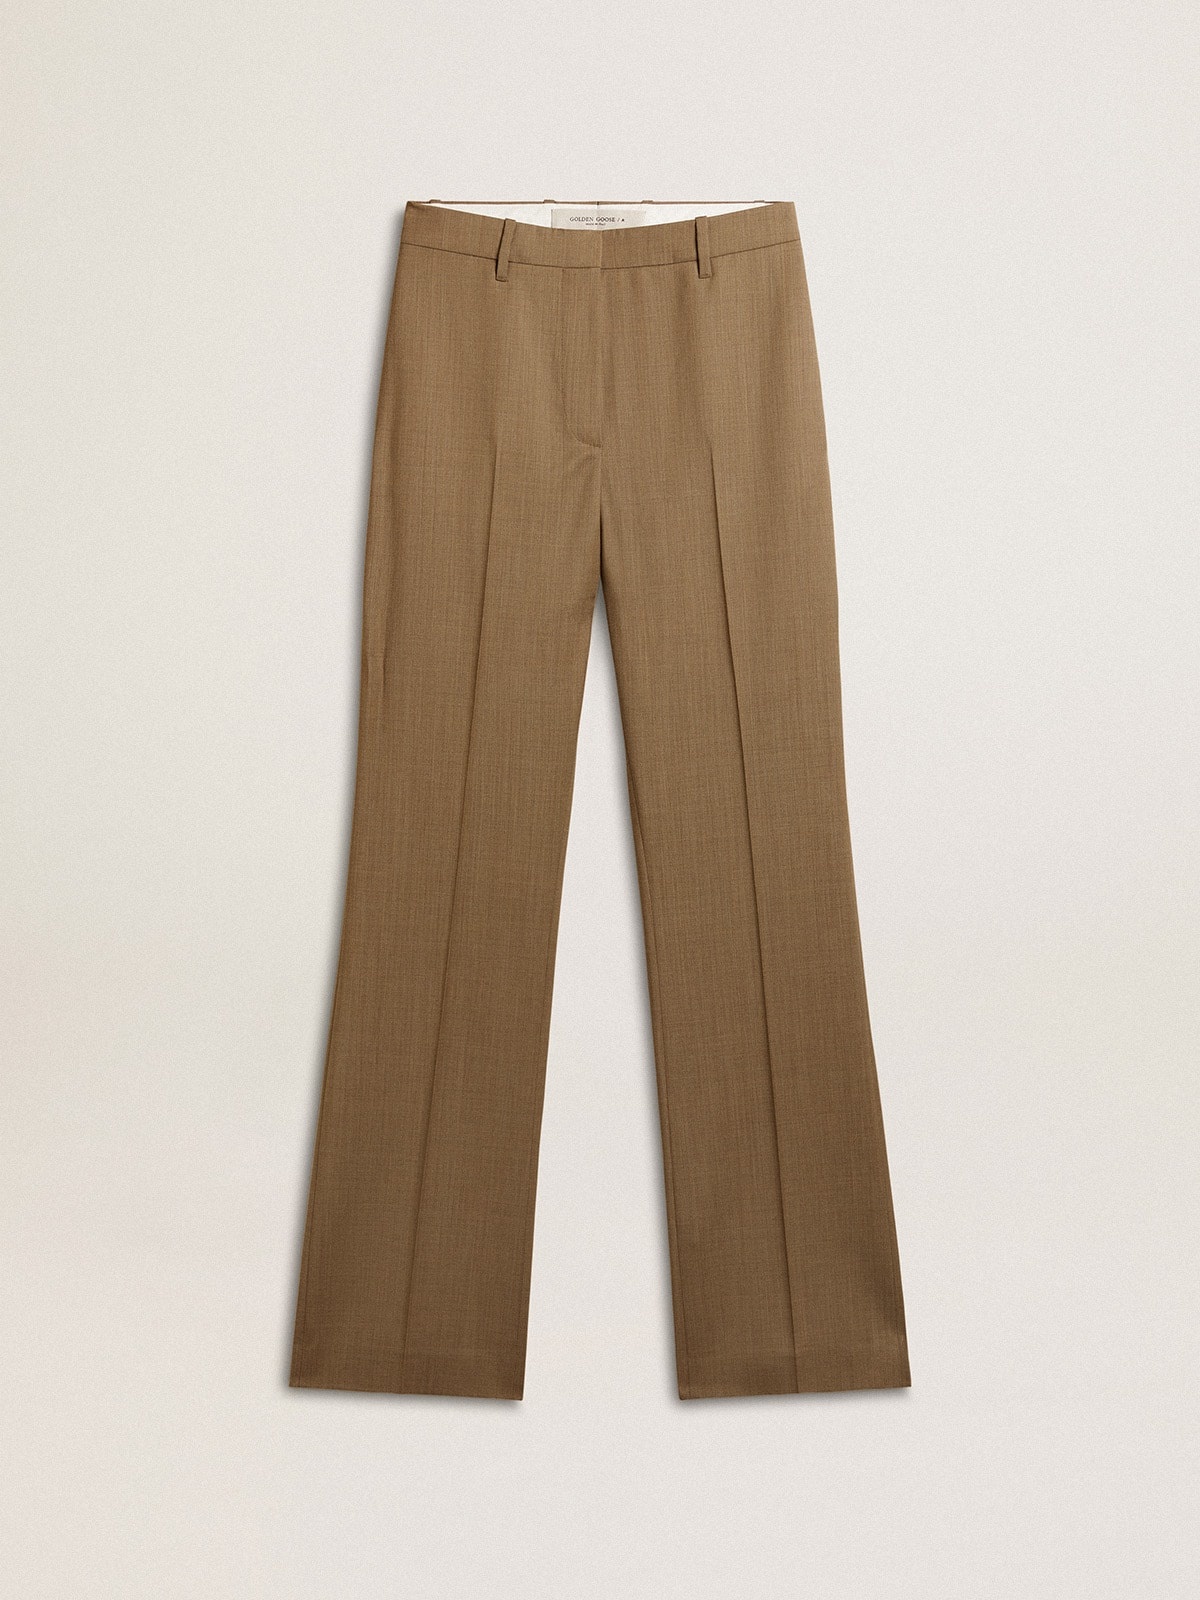 Women's pants in dove-gray tailored wool fabric - 1